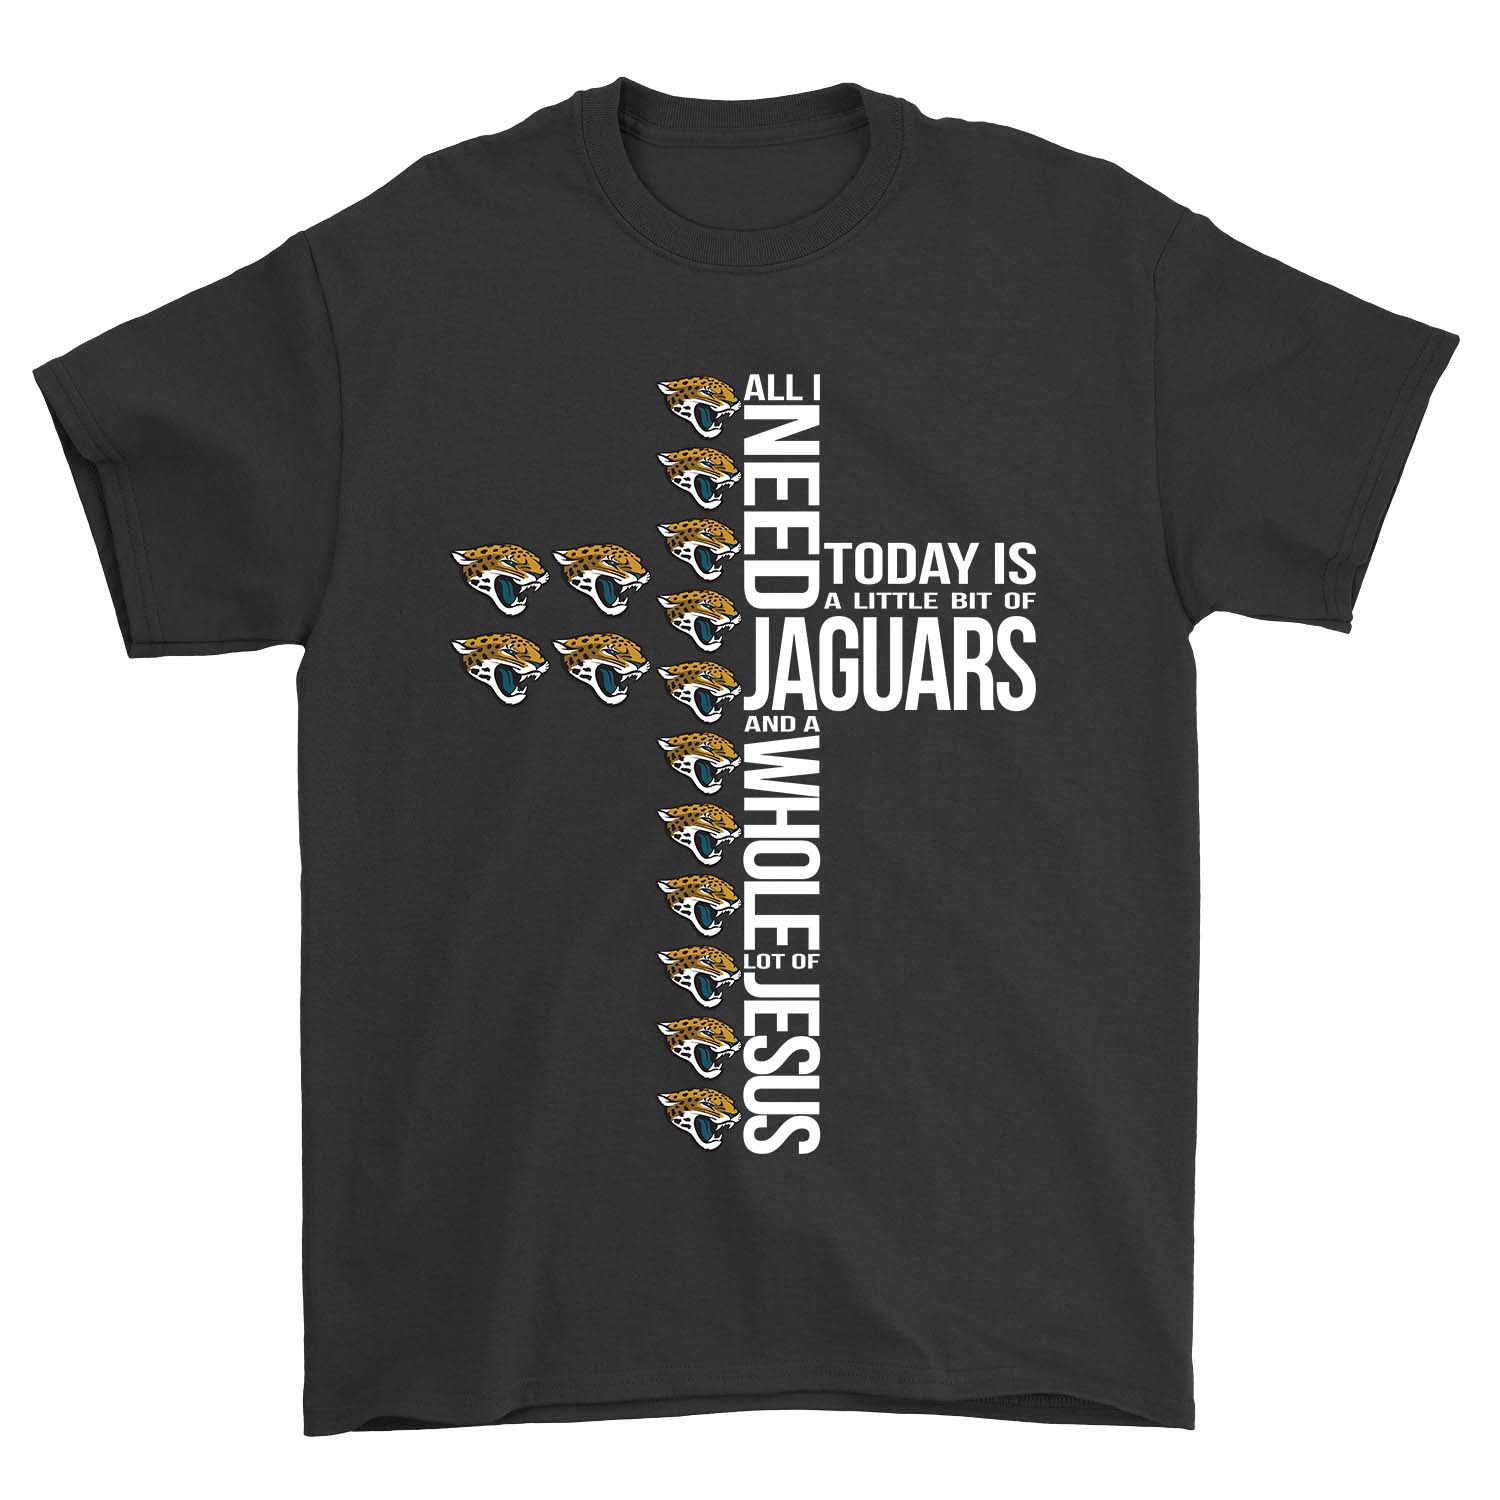 Nfl Jacksonville Jaguars All I Need To Day Is A Little Bit Of Jaguars And A Whole Lot Of Jesus Hoodie Plus Size Up To 5xl